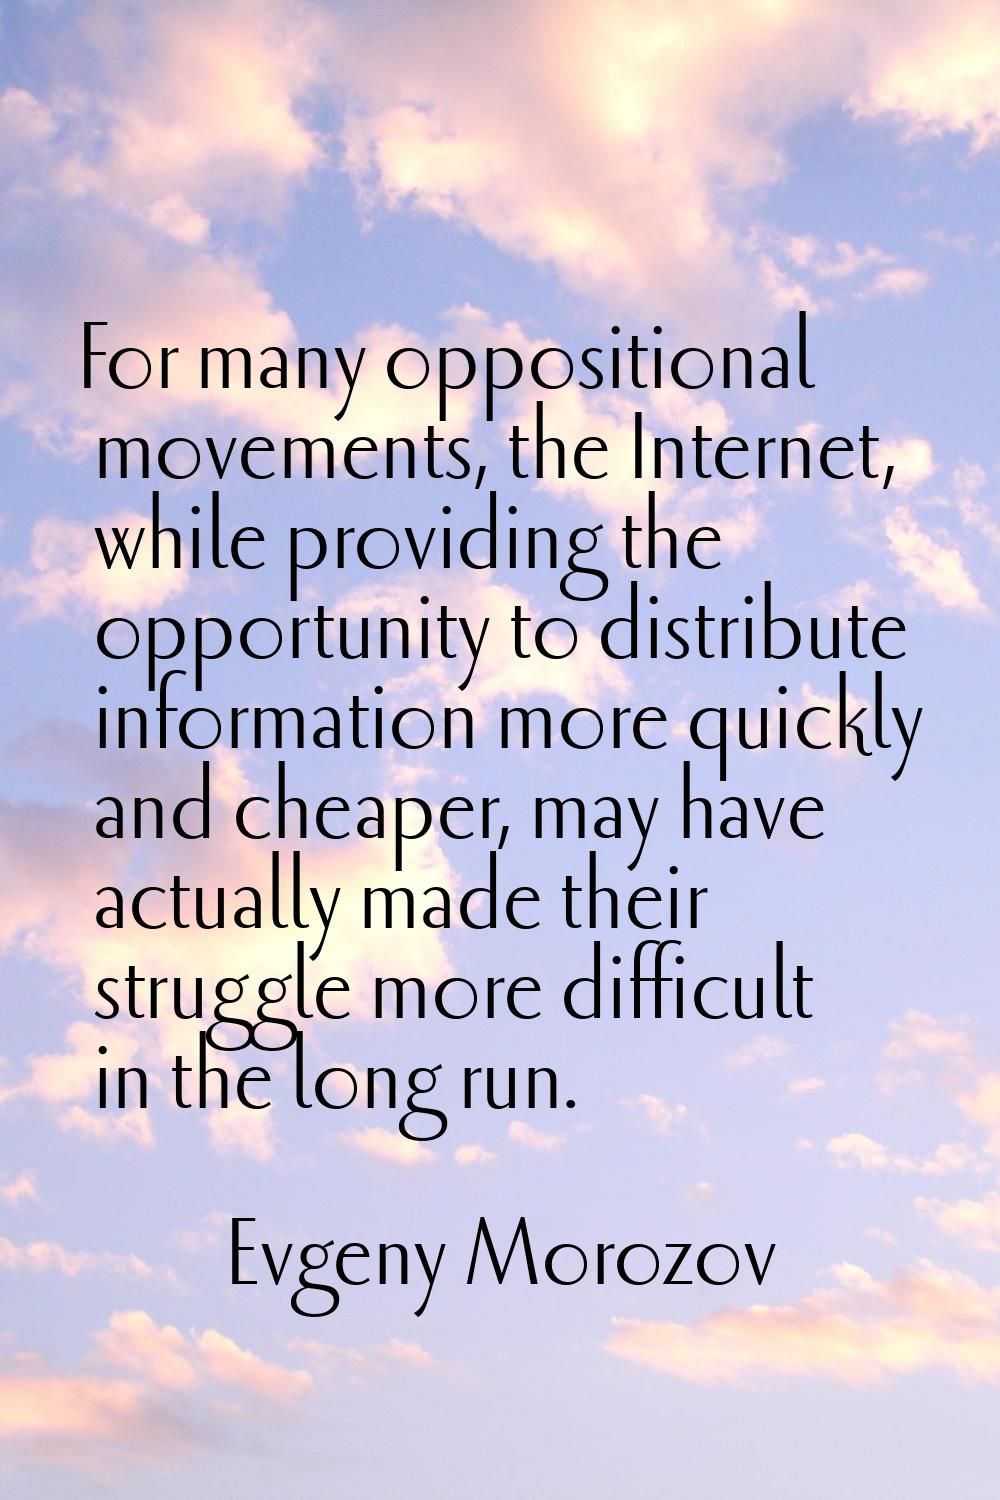 For many oppositional movements, the Internet, while providing the opportunity to distribute inform